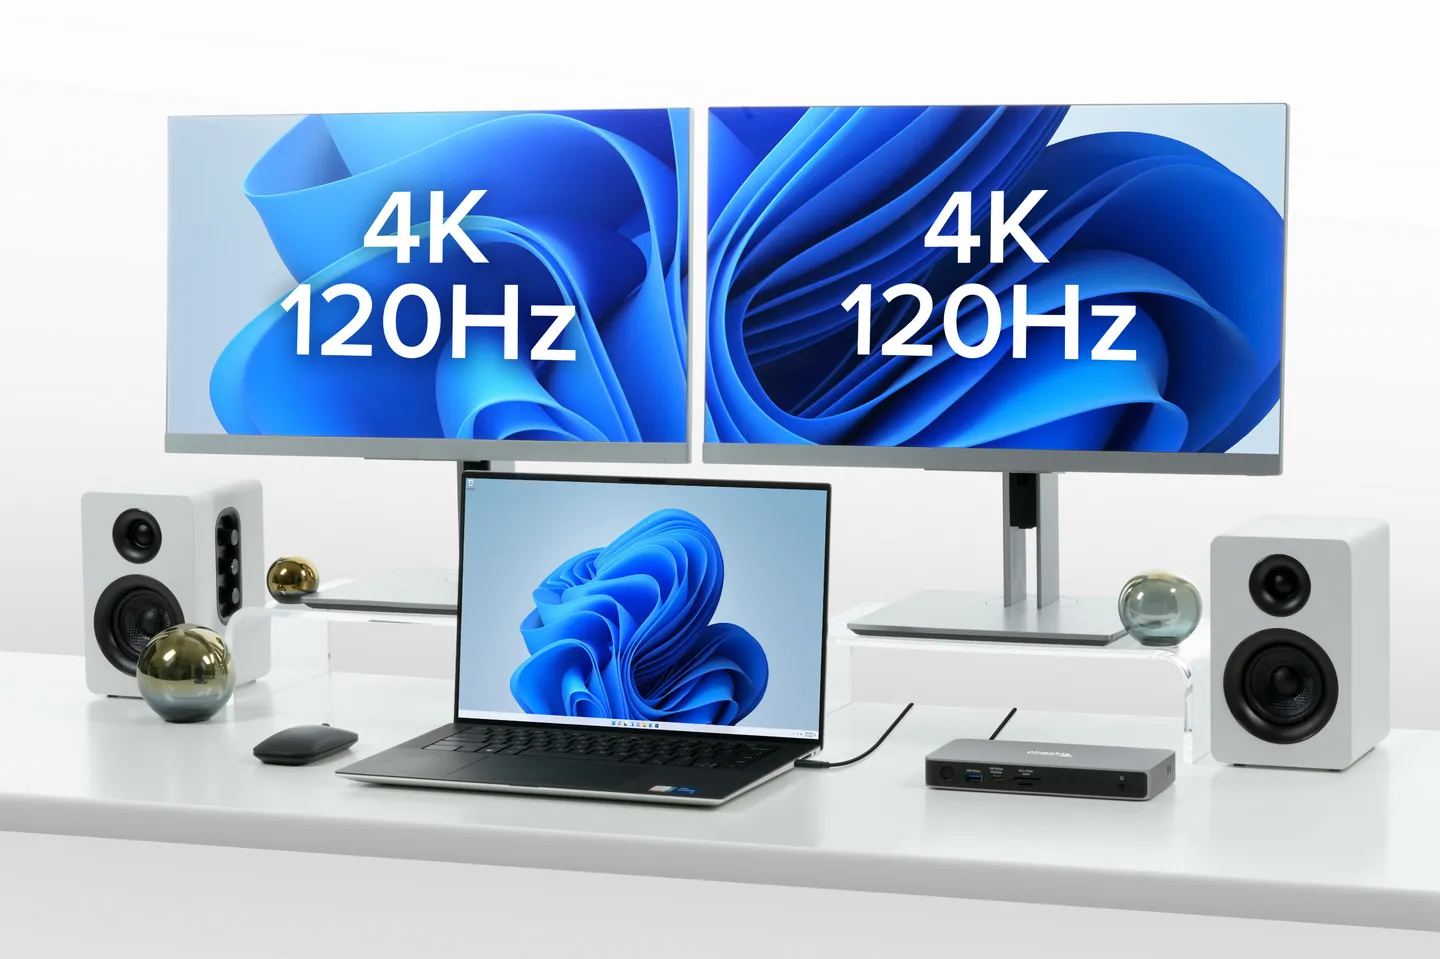 Plugable says the dock can power two 4K displays at up to 120Hz. Image: Plugable